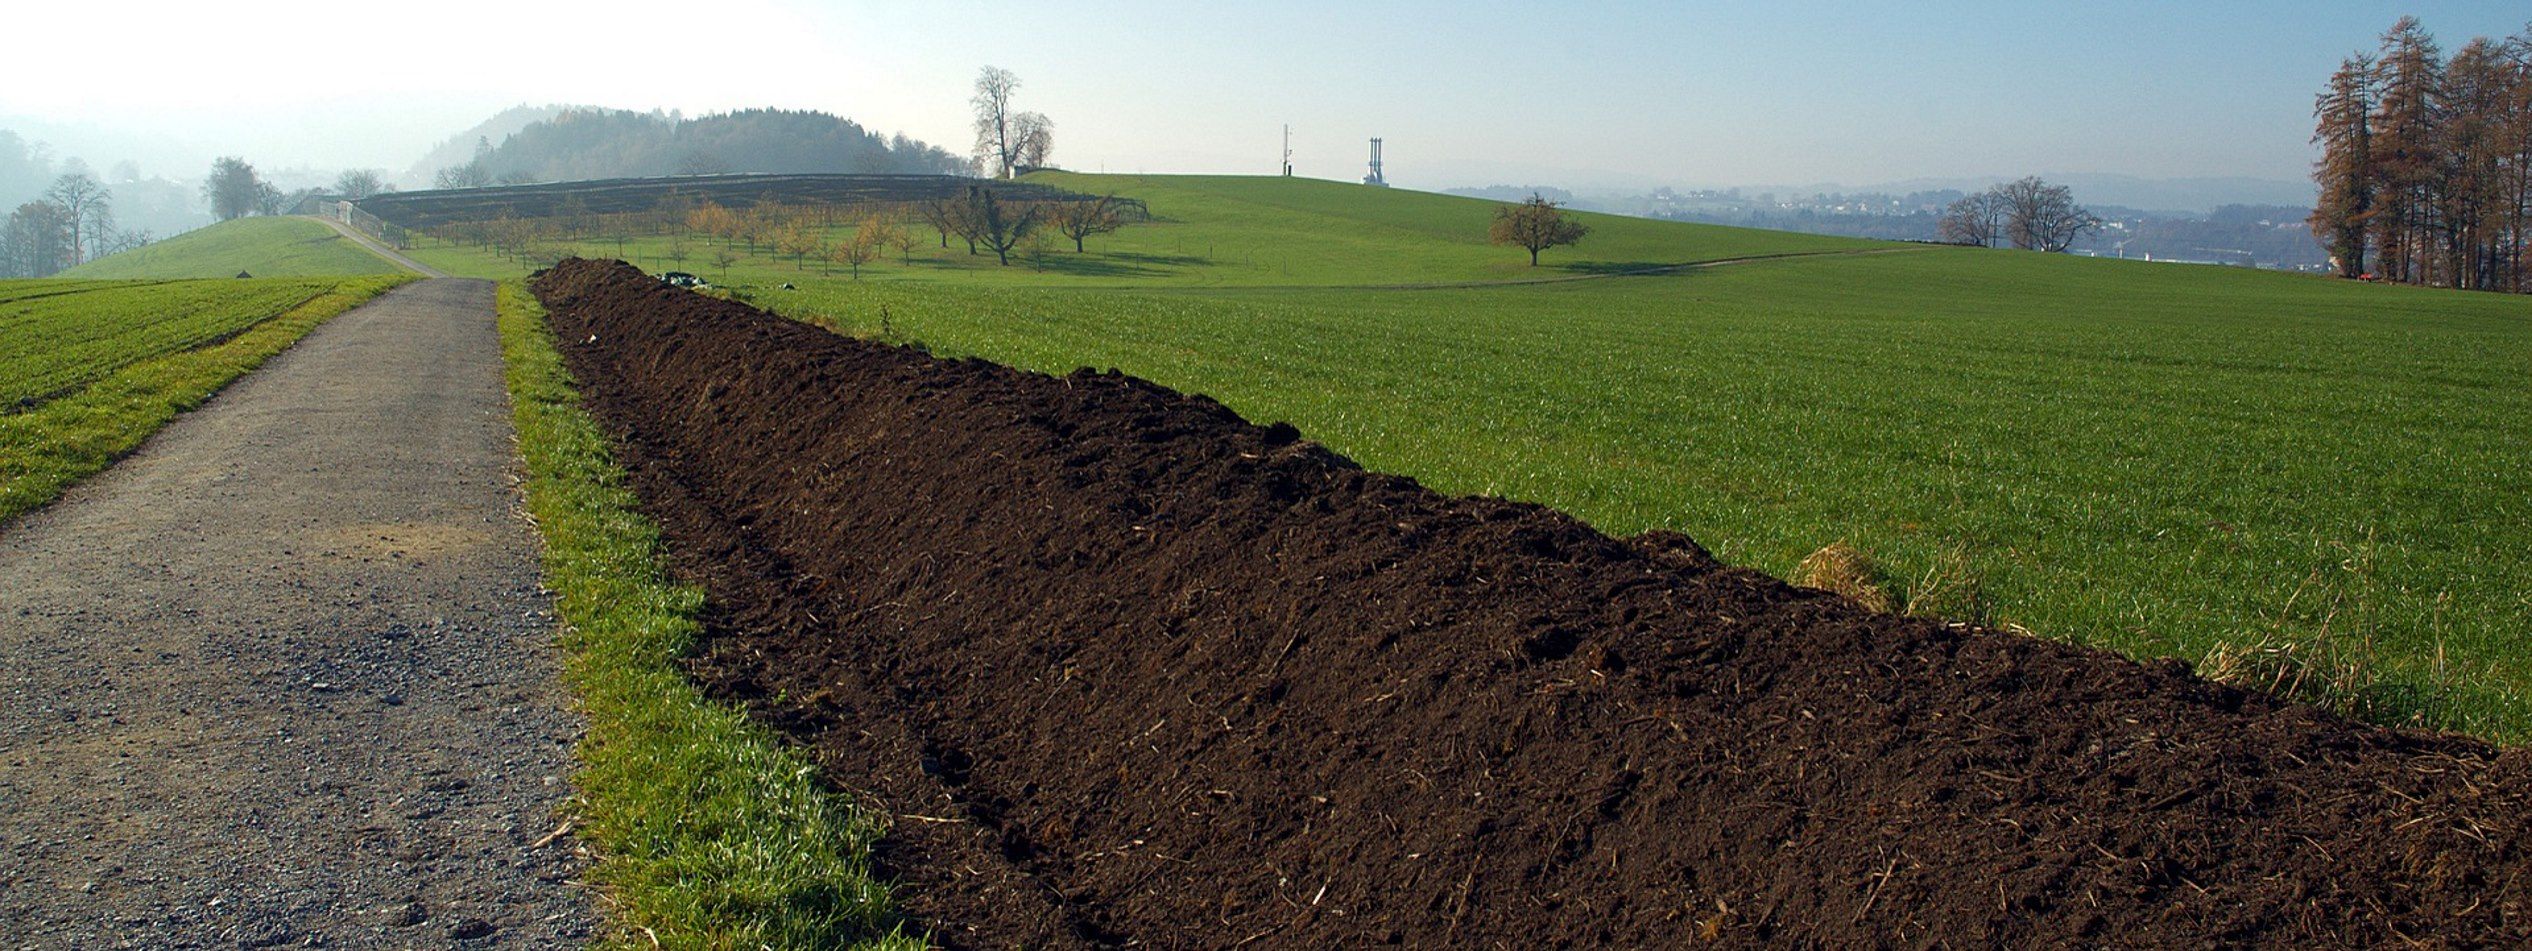 Effective nutrient cycling - compost